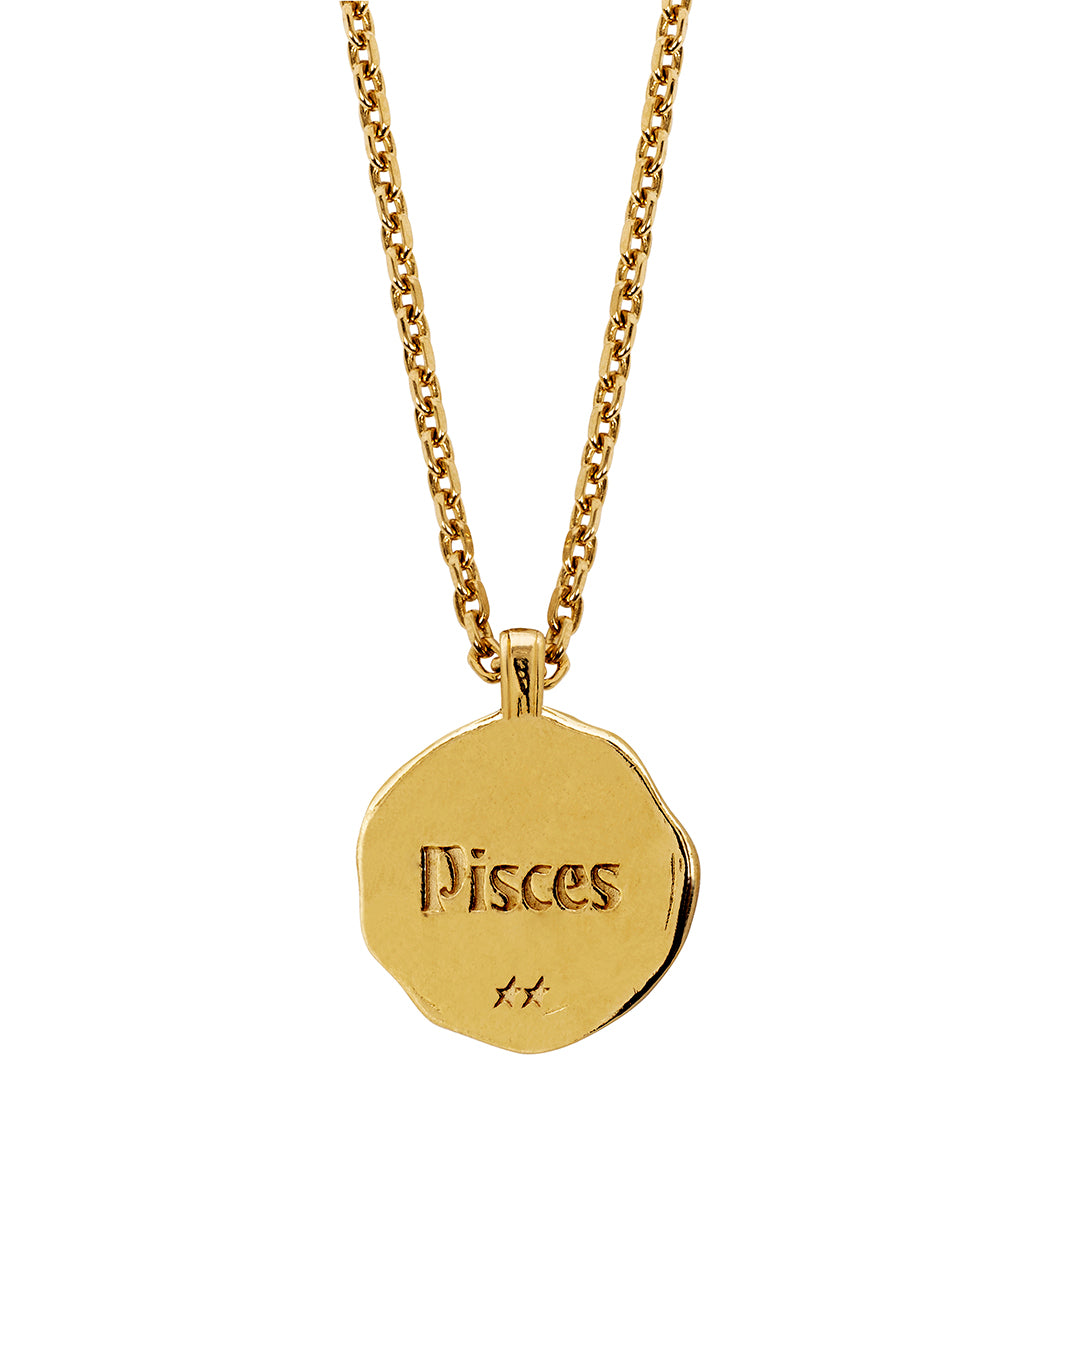 Gold Necklace Twojeys – Pisces